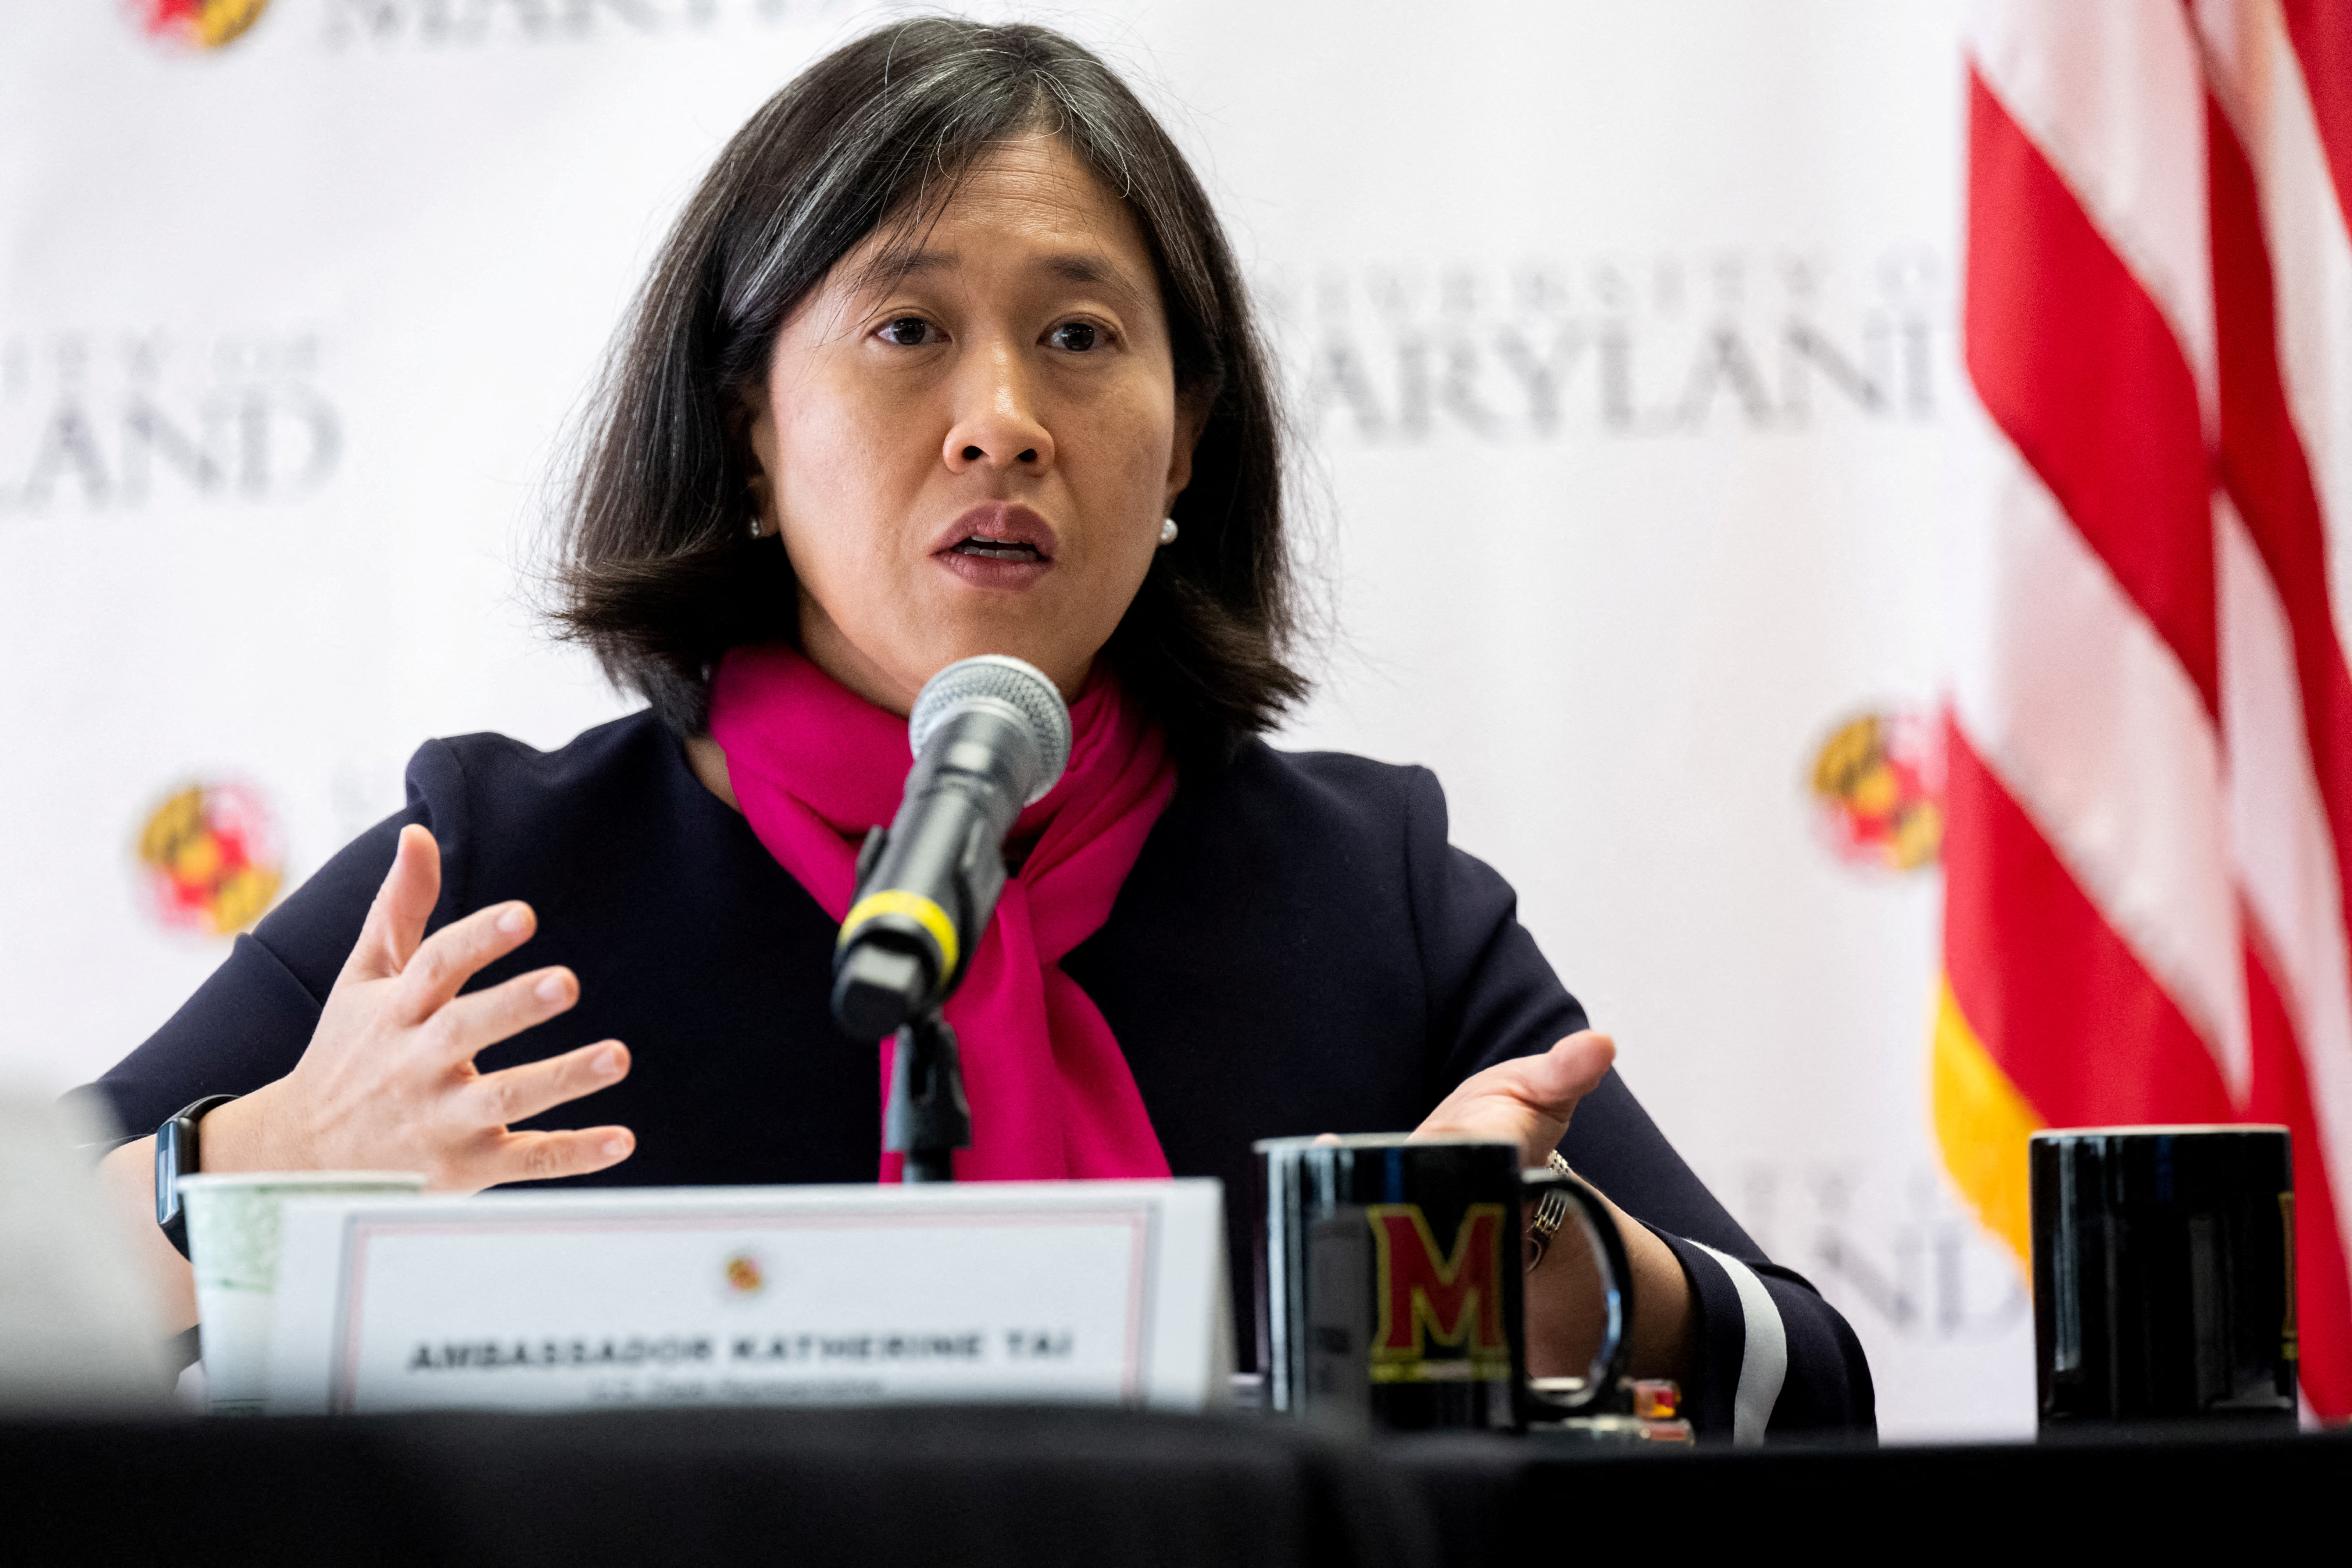 U.S. Secretary of State Blinken attends the Ministerial Meeting at the University of Maryland in College Park